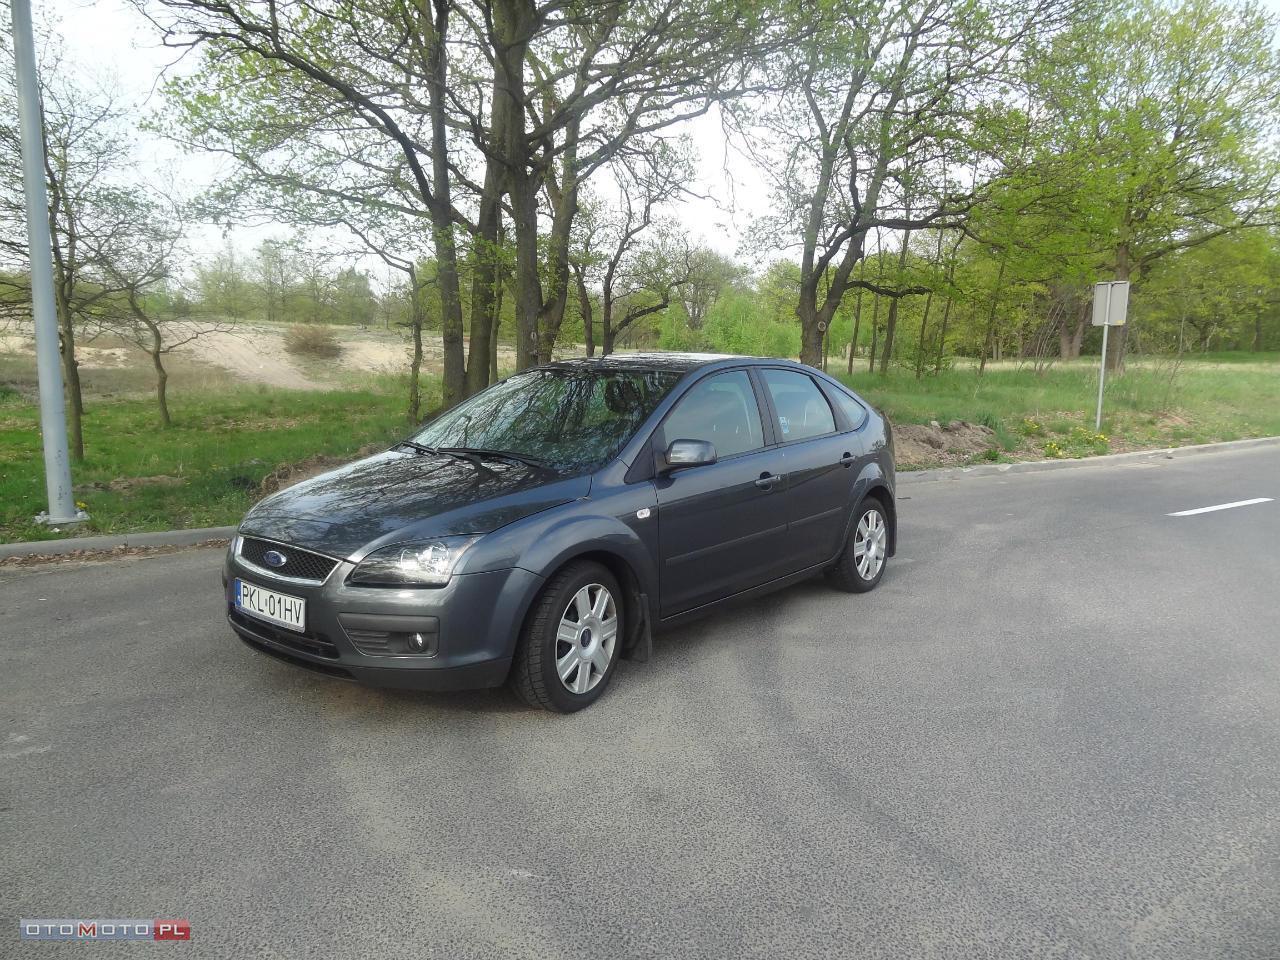 Ford Focus FX GOLD 2.0 TDCi 136 KM